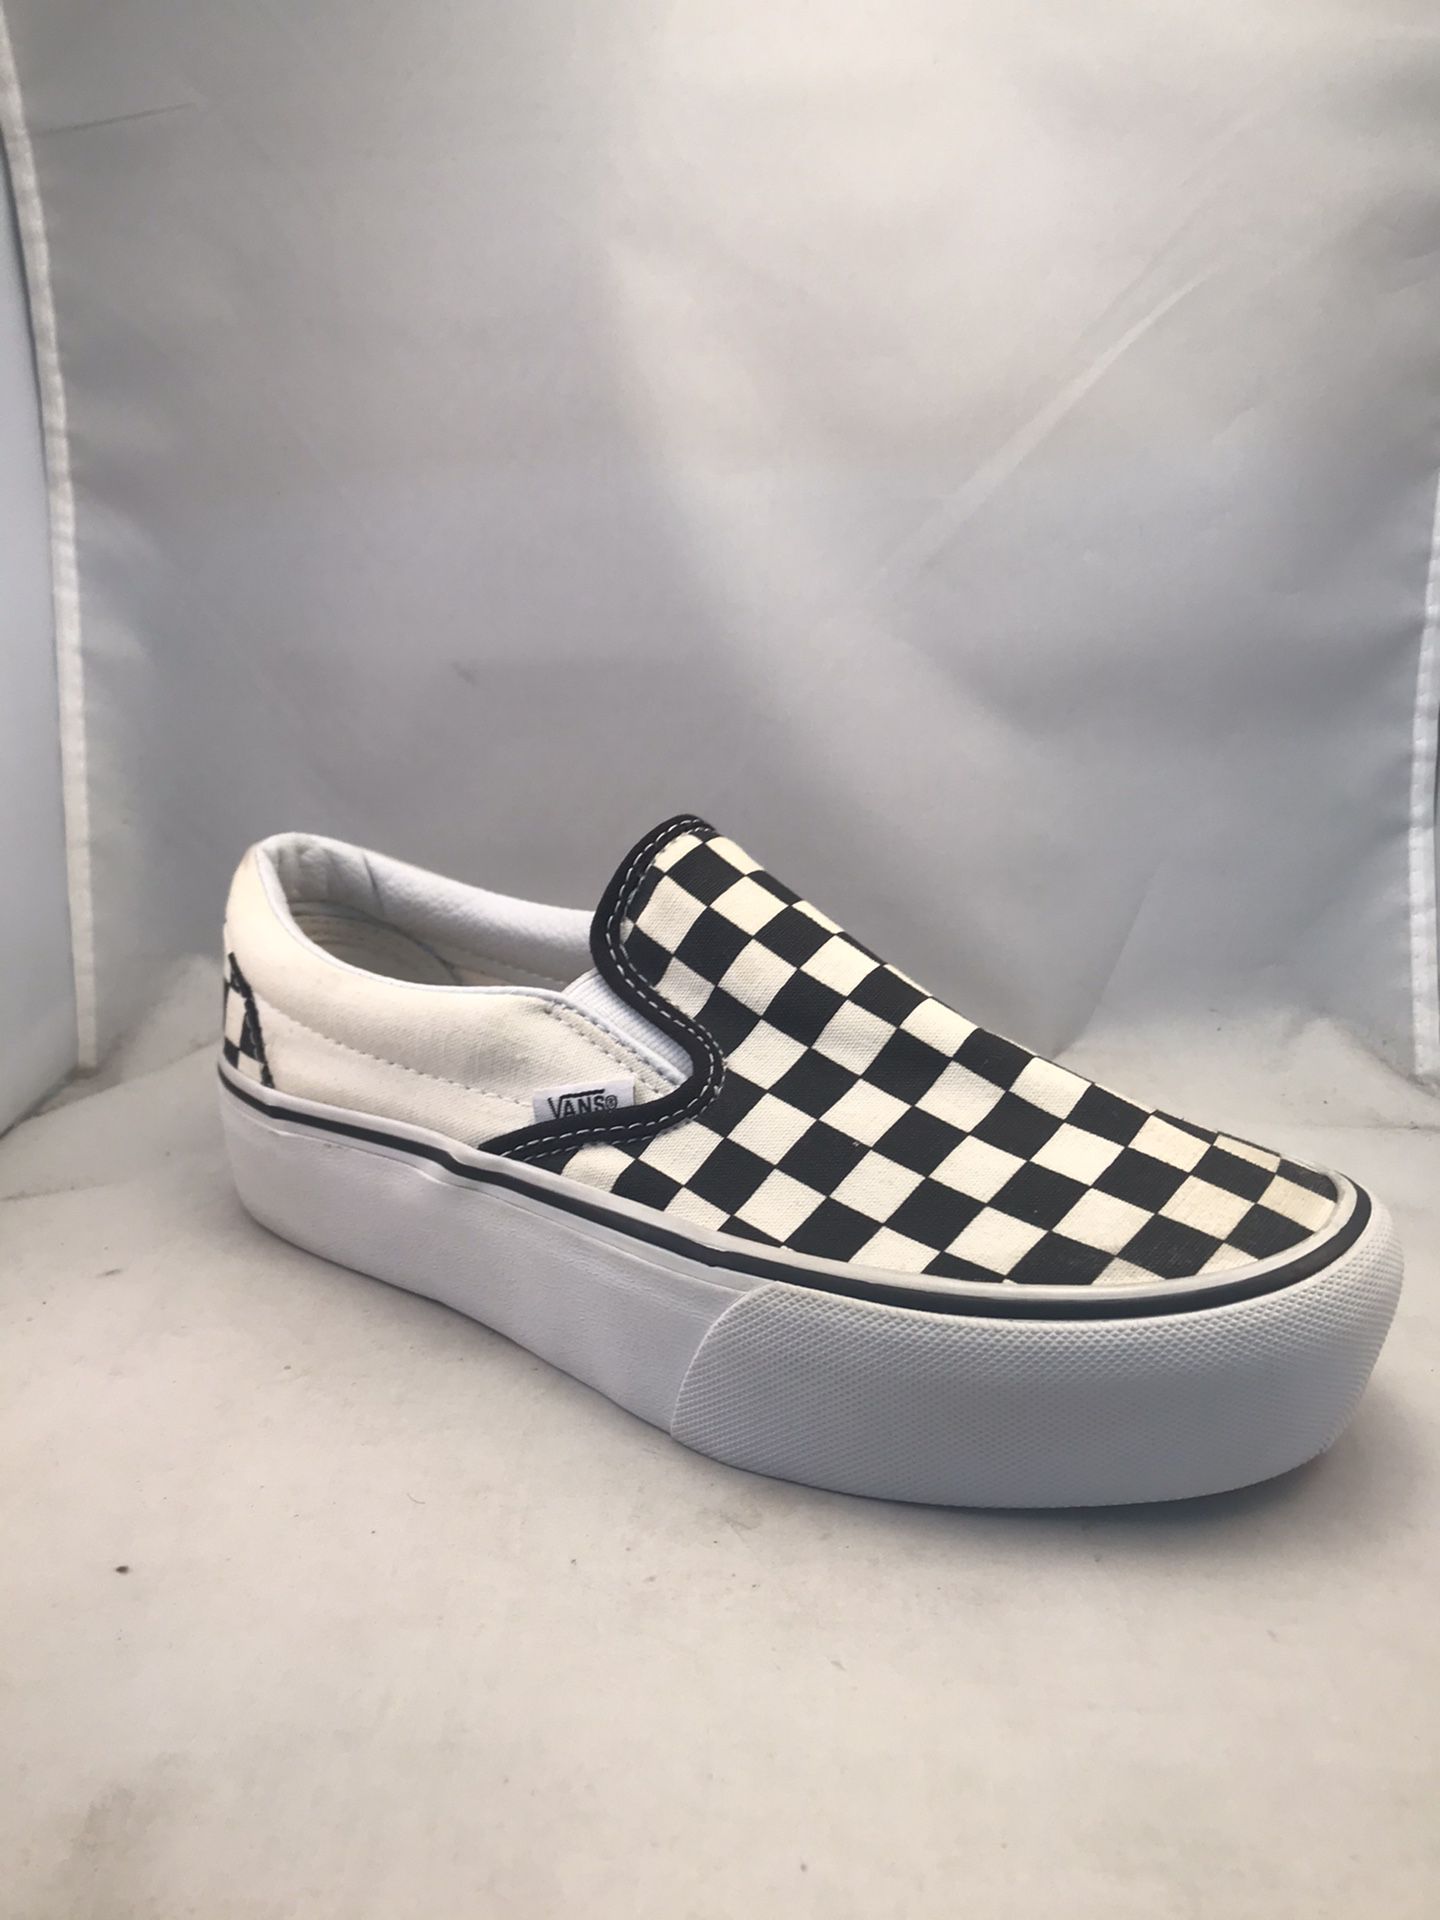 Vans Classic Slip On Skateboarding or Casual Shoes